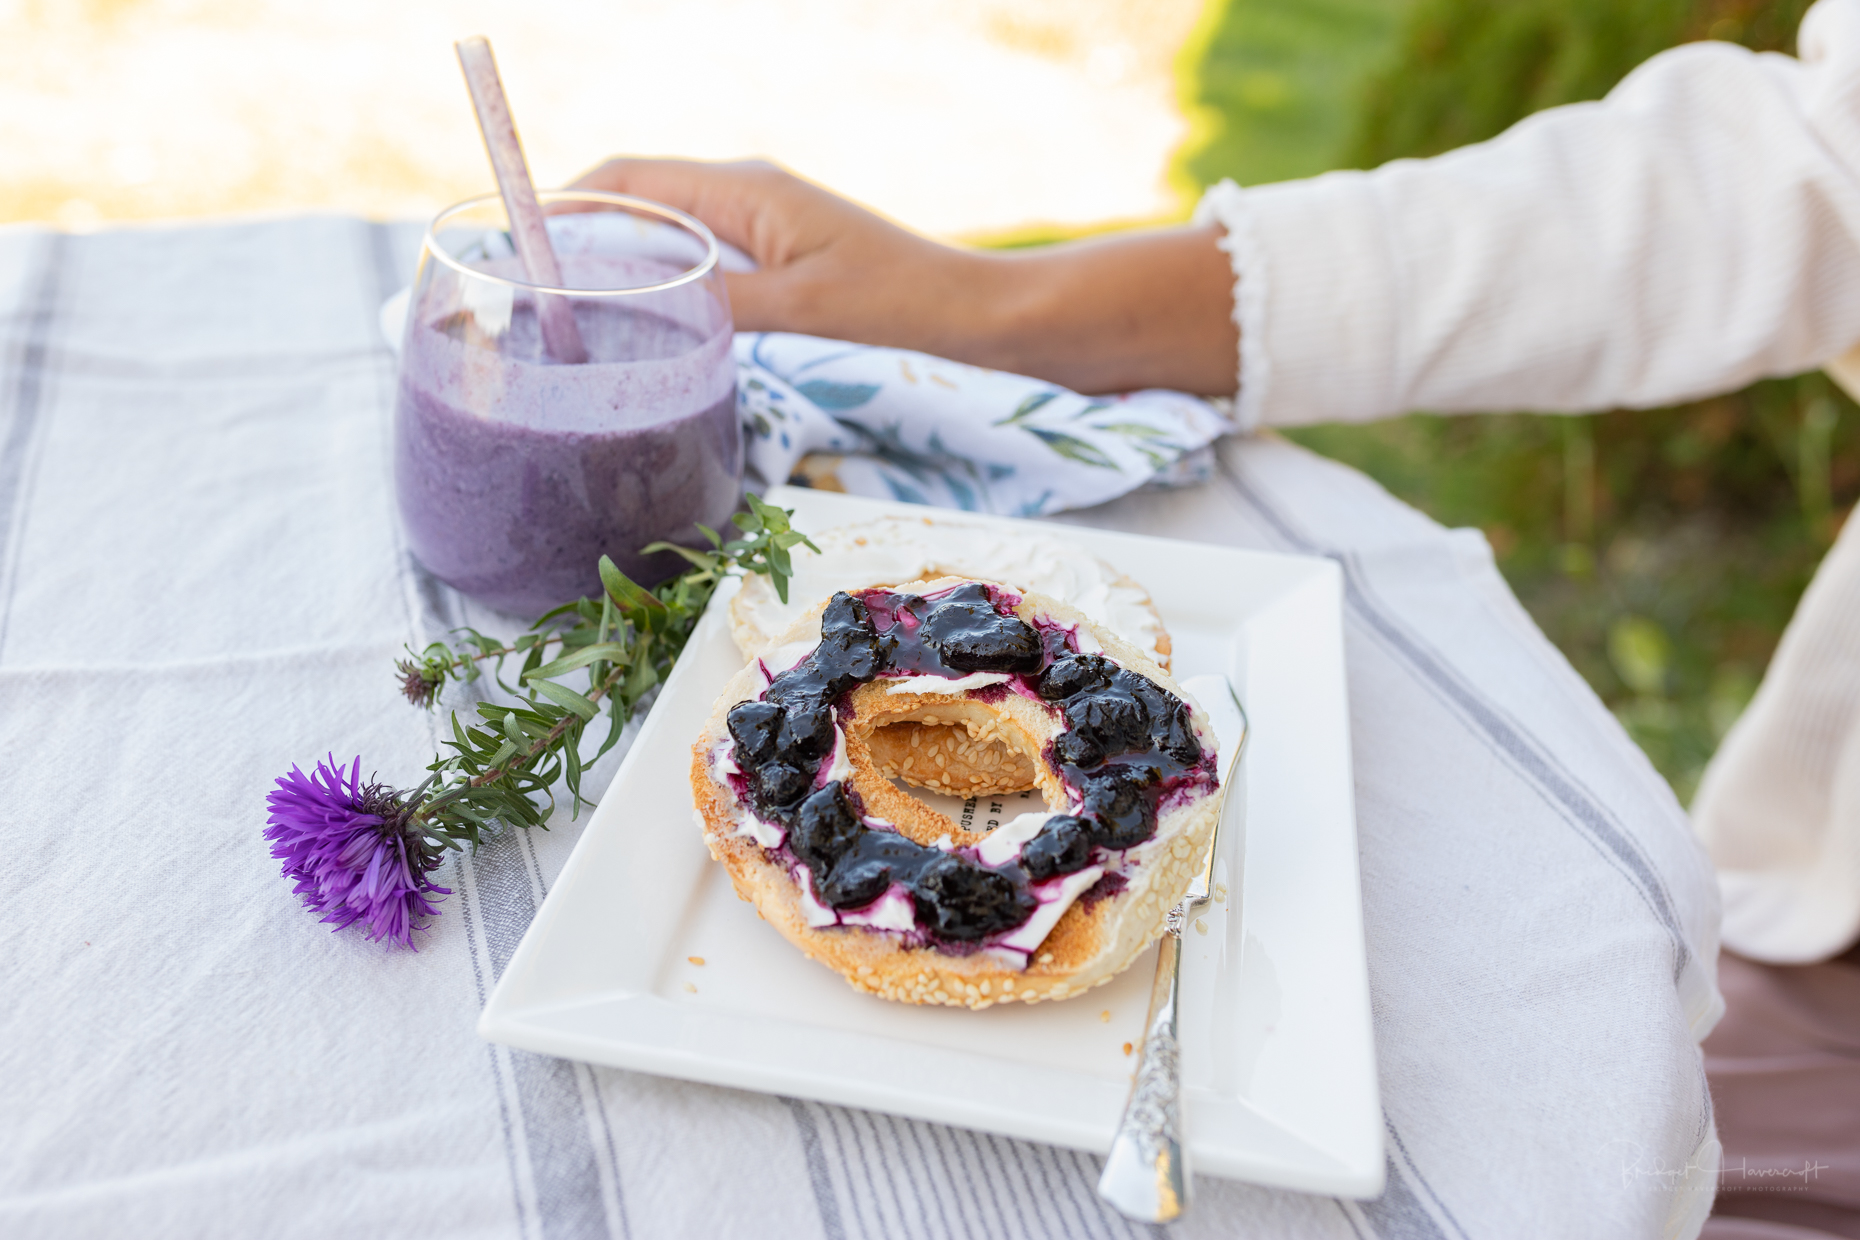 Haskap Highland Berries-Breakfast on the terrace. A delicious kaskap berry smoothie with a cream cheese bagel covered in haskap preserve